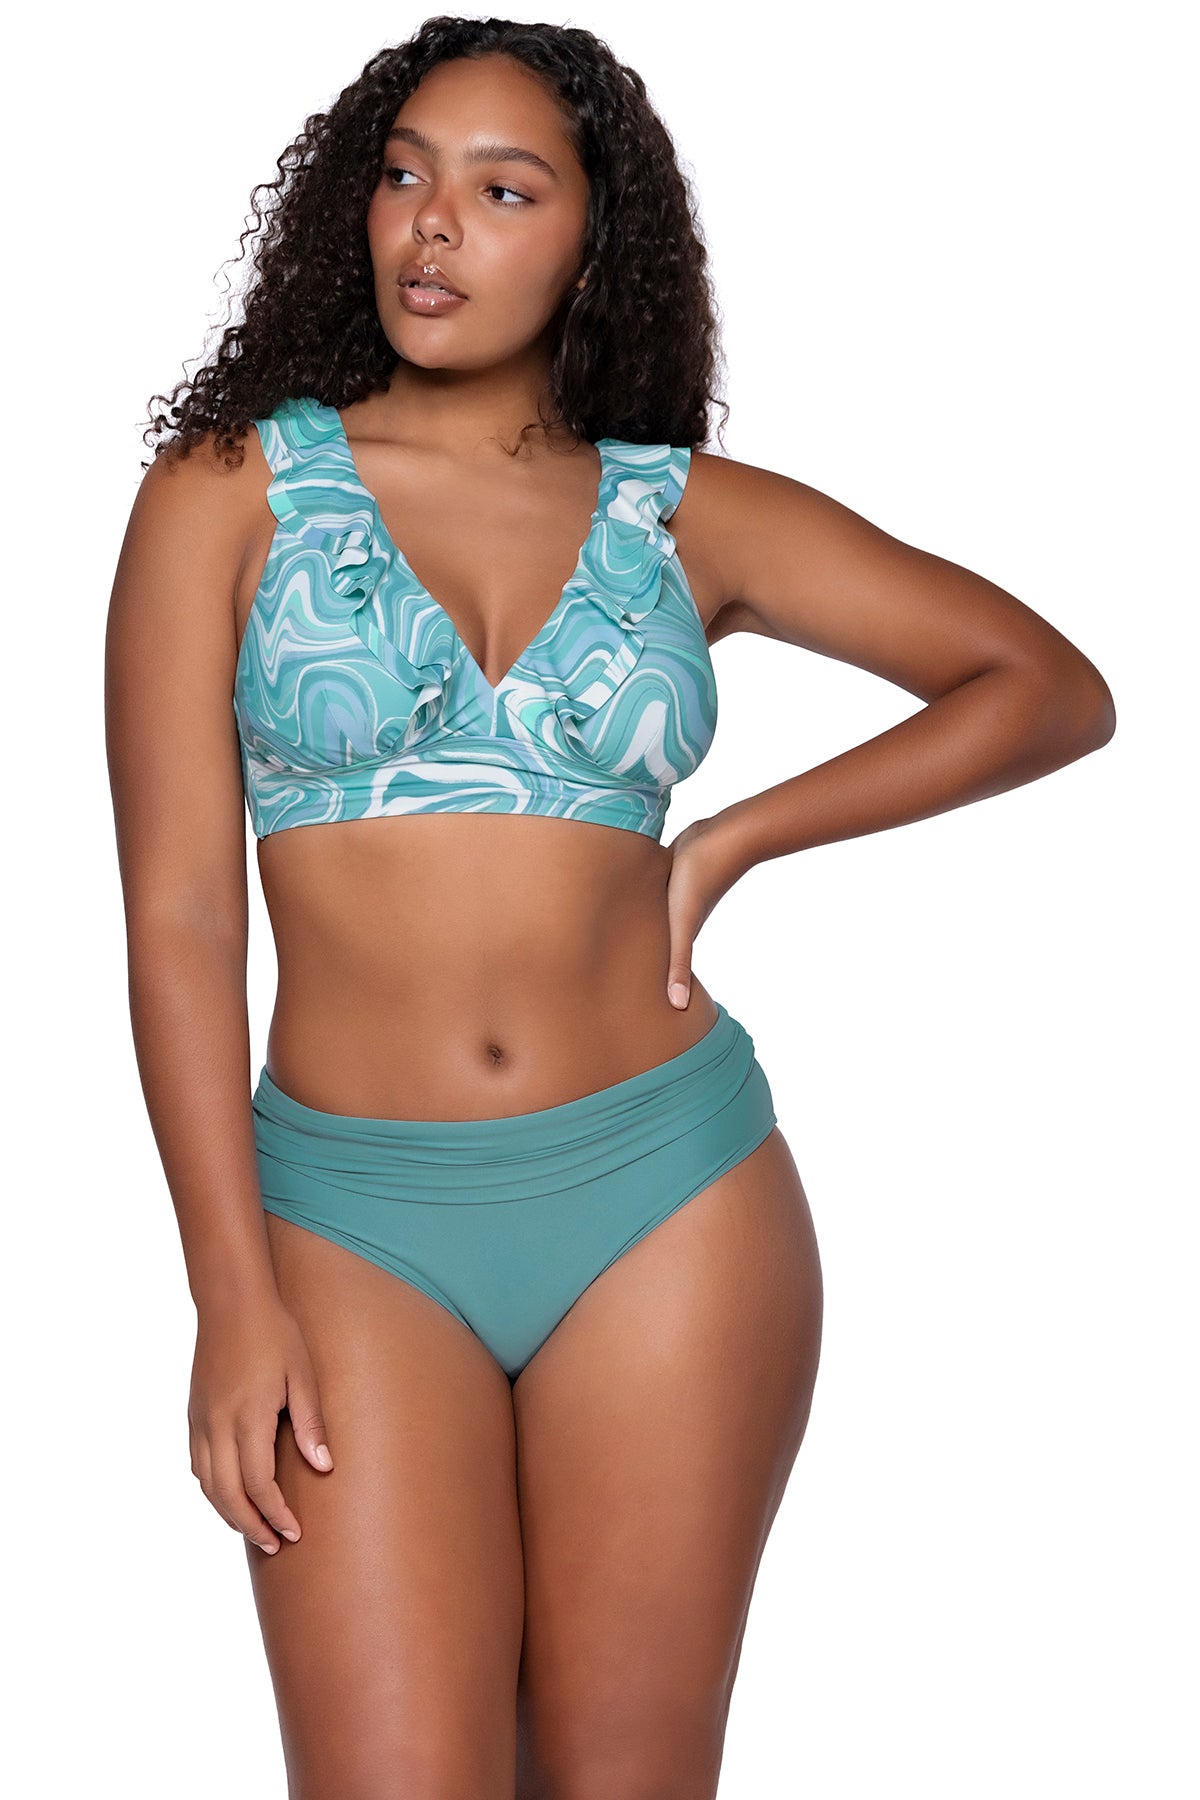 Front view of Sunsets Moon Tide Willa Wireless Top with matching Hannah High Waist bikini bottom showing scrunched waist